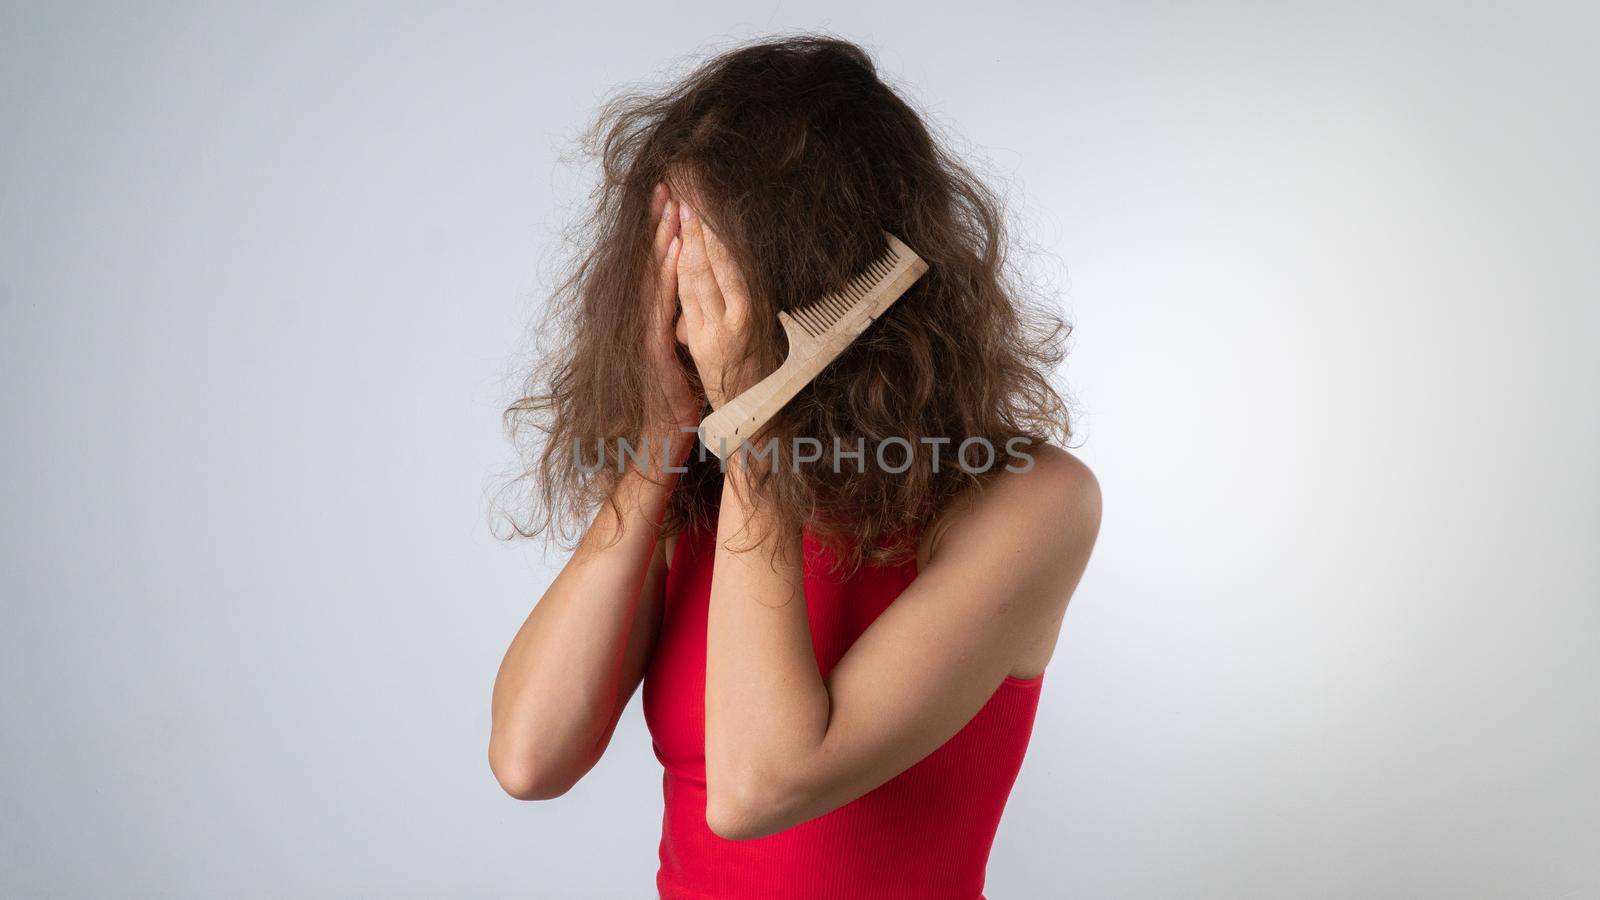 Upset woman with a tangled comb in her hair, problematic, naughty hair with split ends. High quality photo